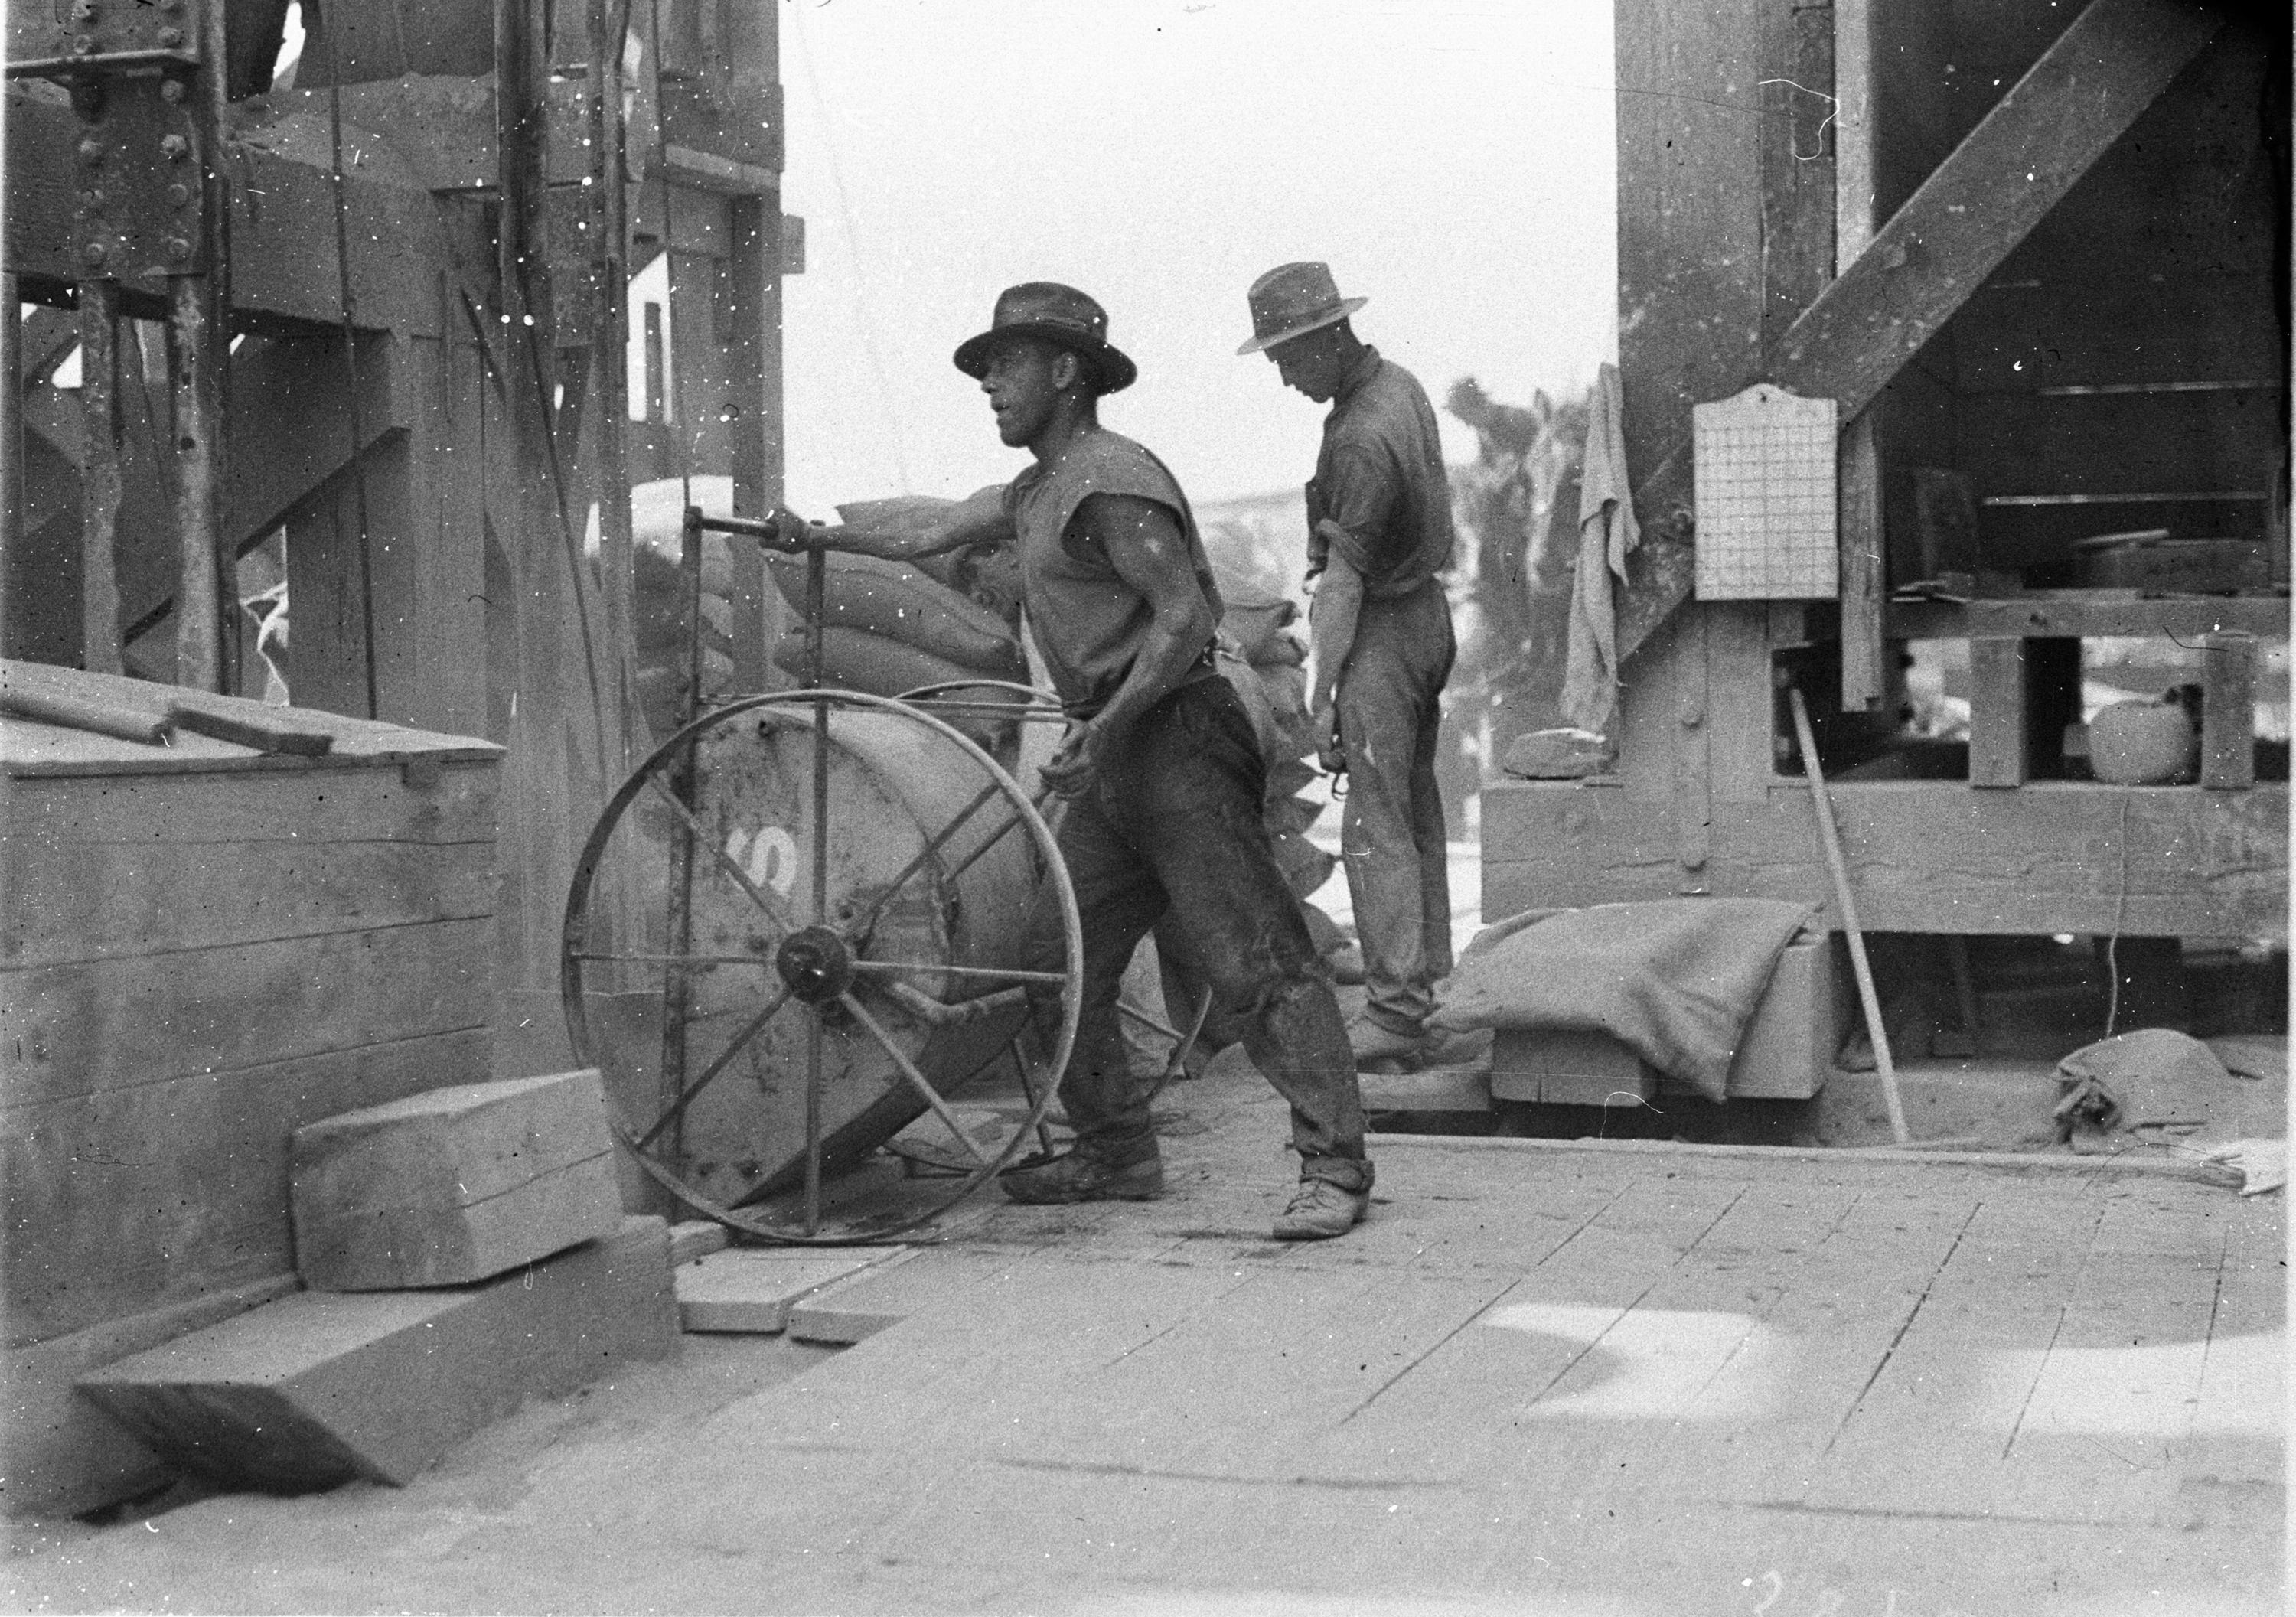 Workmen mixing and pouring concrete with small hand-wheeled hoppers Creator Hood, Ted, 1911-2000, Call Number, Home and Away - 2262 Digital Order No. hood_02262